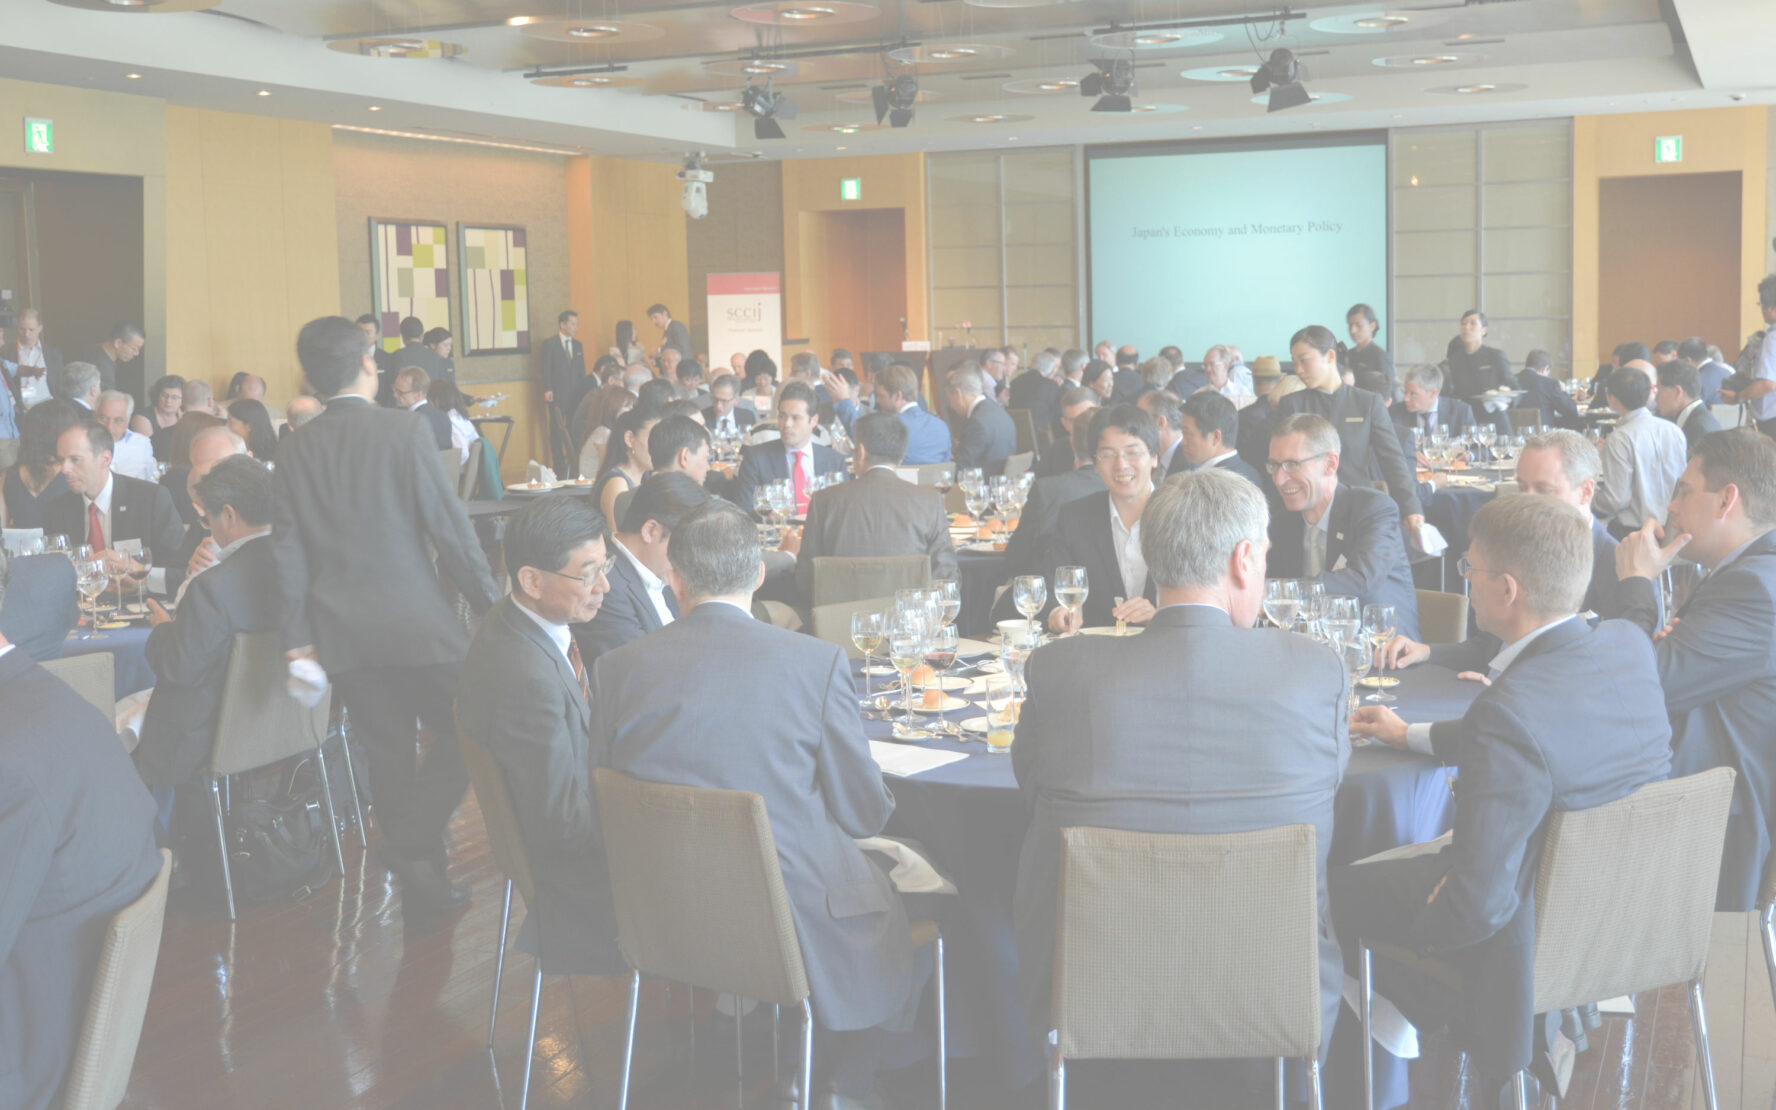 Shinnenkai-Luncheon: “Japan’s Growth Potential and Future Challenges”